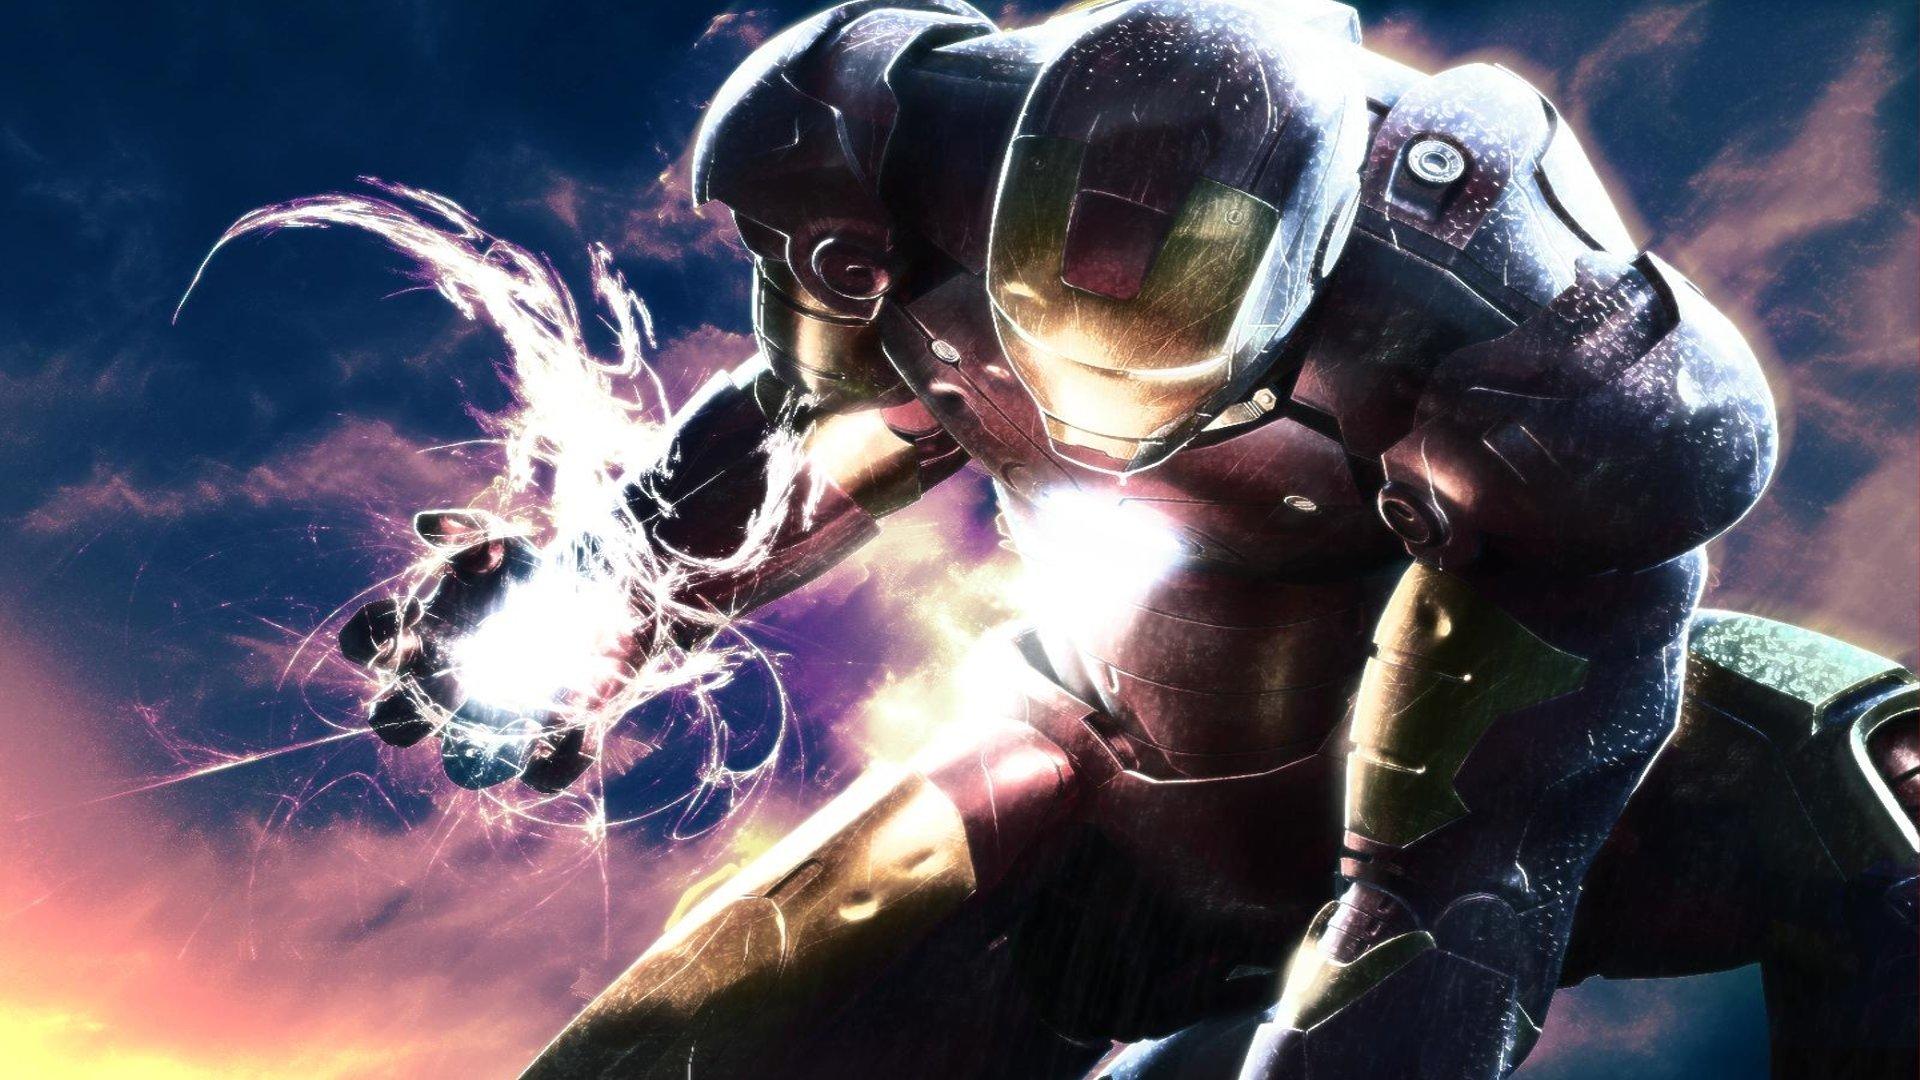 Iron man the movie image iron man HD wallpaper and background